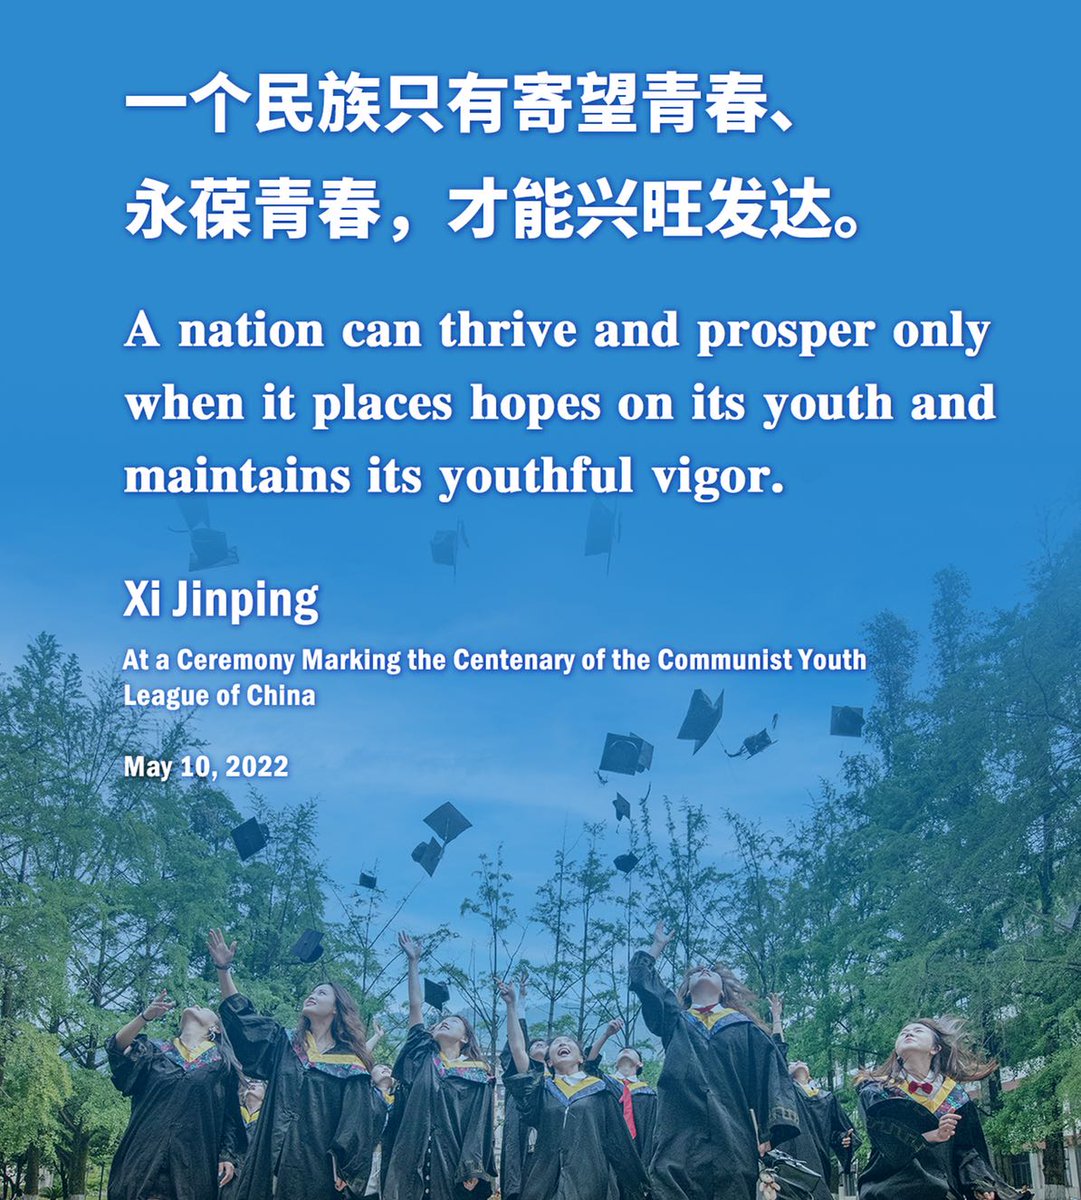 Highlights of President Xi Jinping's quotes on youth.#学习进行时天津在行动 #学而时习之 #WiththePeople #Aveclepeuple #人民と共に #인민과함께 #معأبناءالشعب